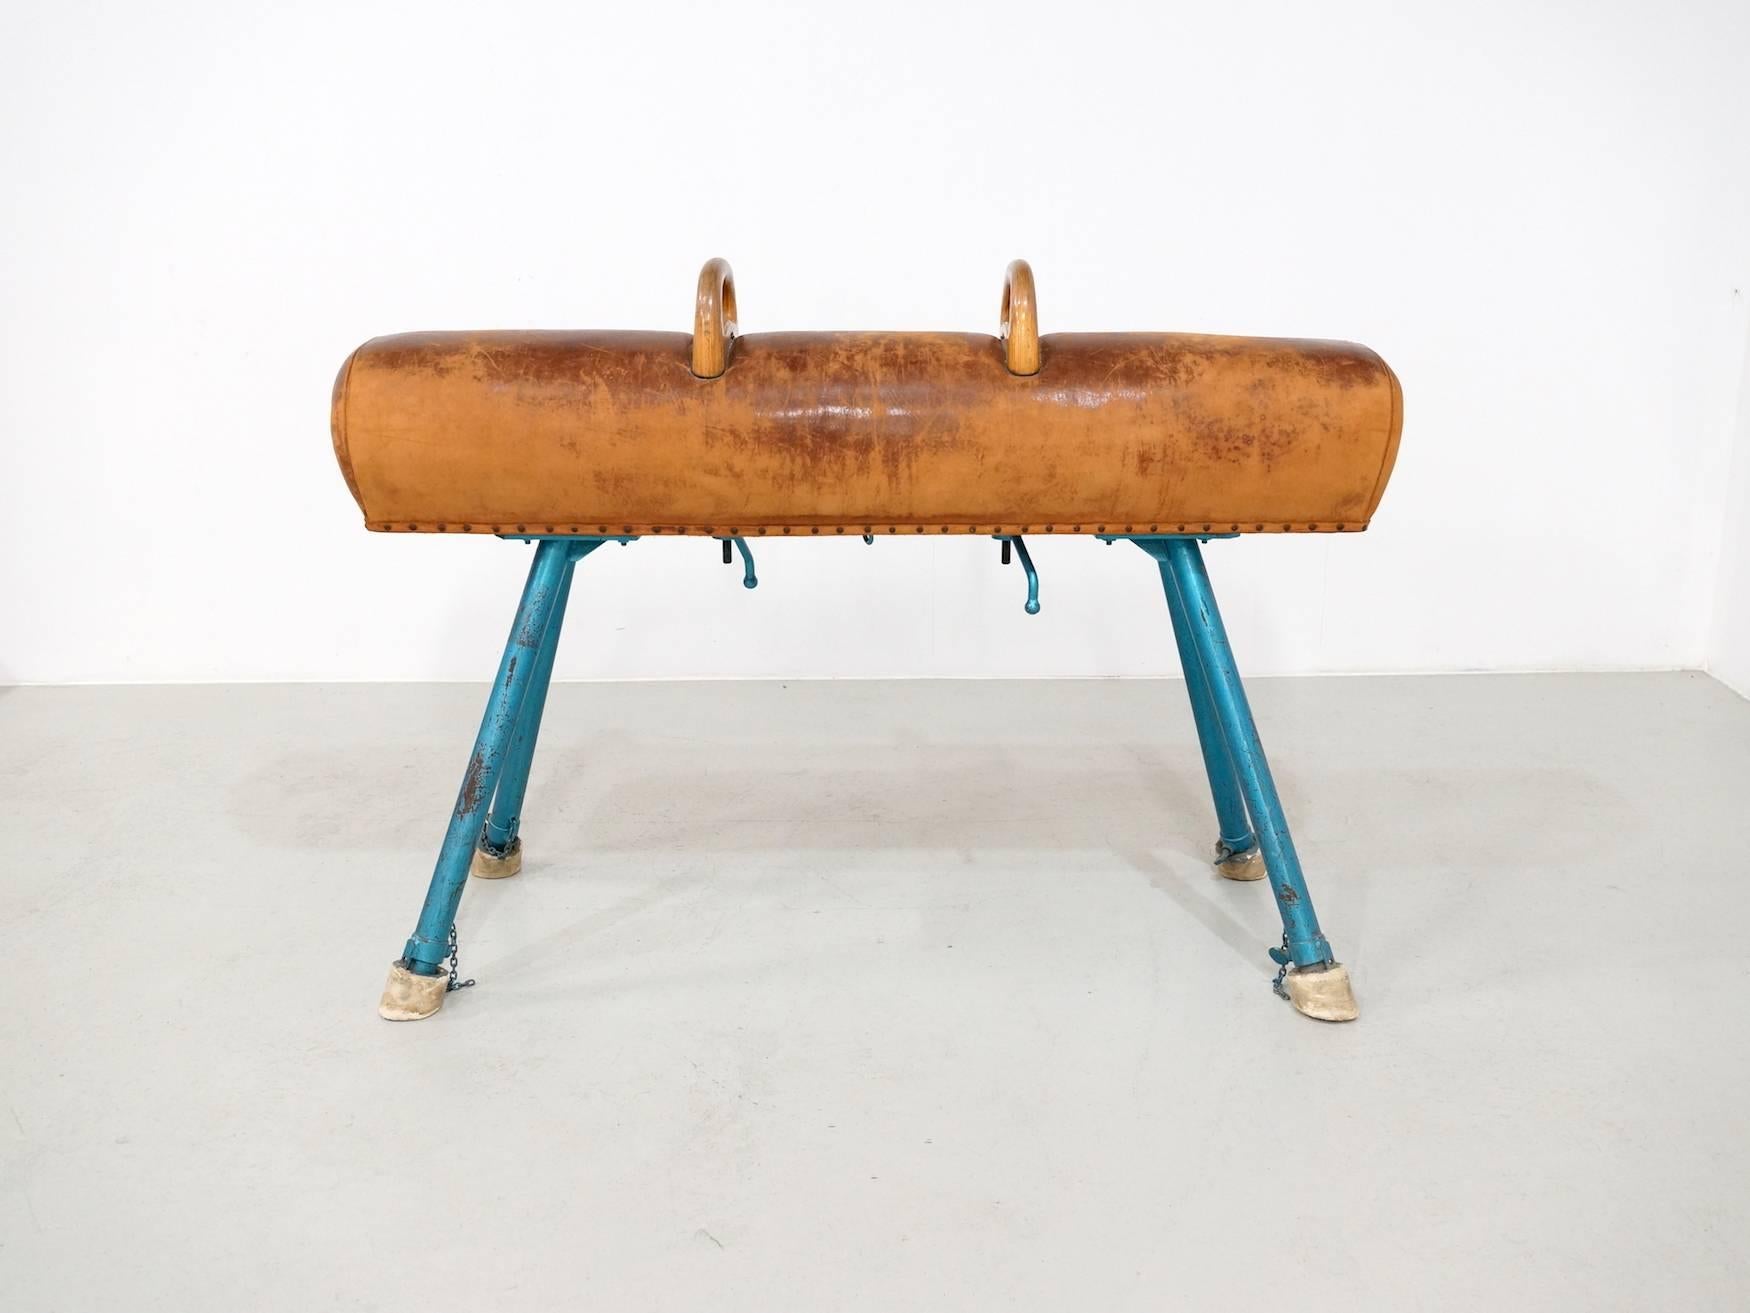 A sporty early 1950s leather, wood and iron pommel horse with adjustable legs and two wooden handles.
The Leather has a beautiful patine and is used but not broken or teared. This is how they where used in the gym:
The gymnast swings both legs in